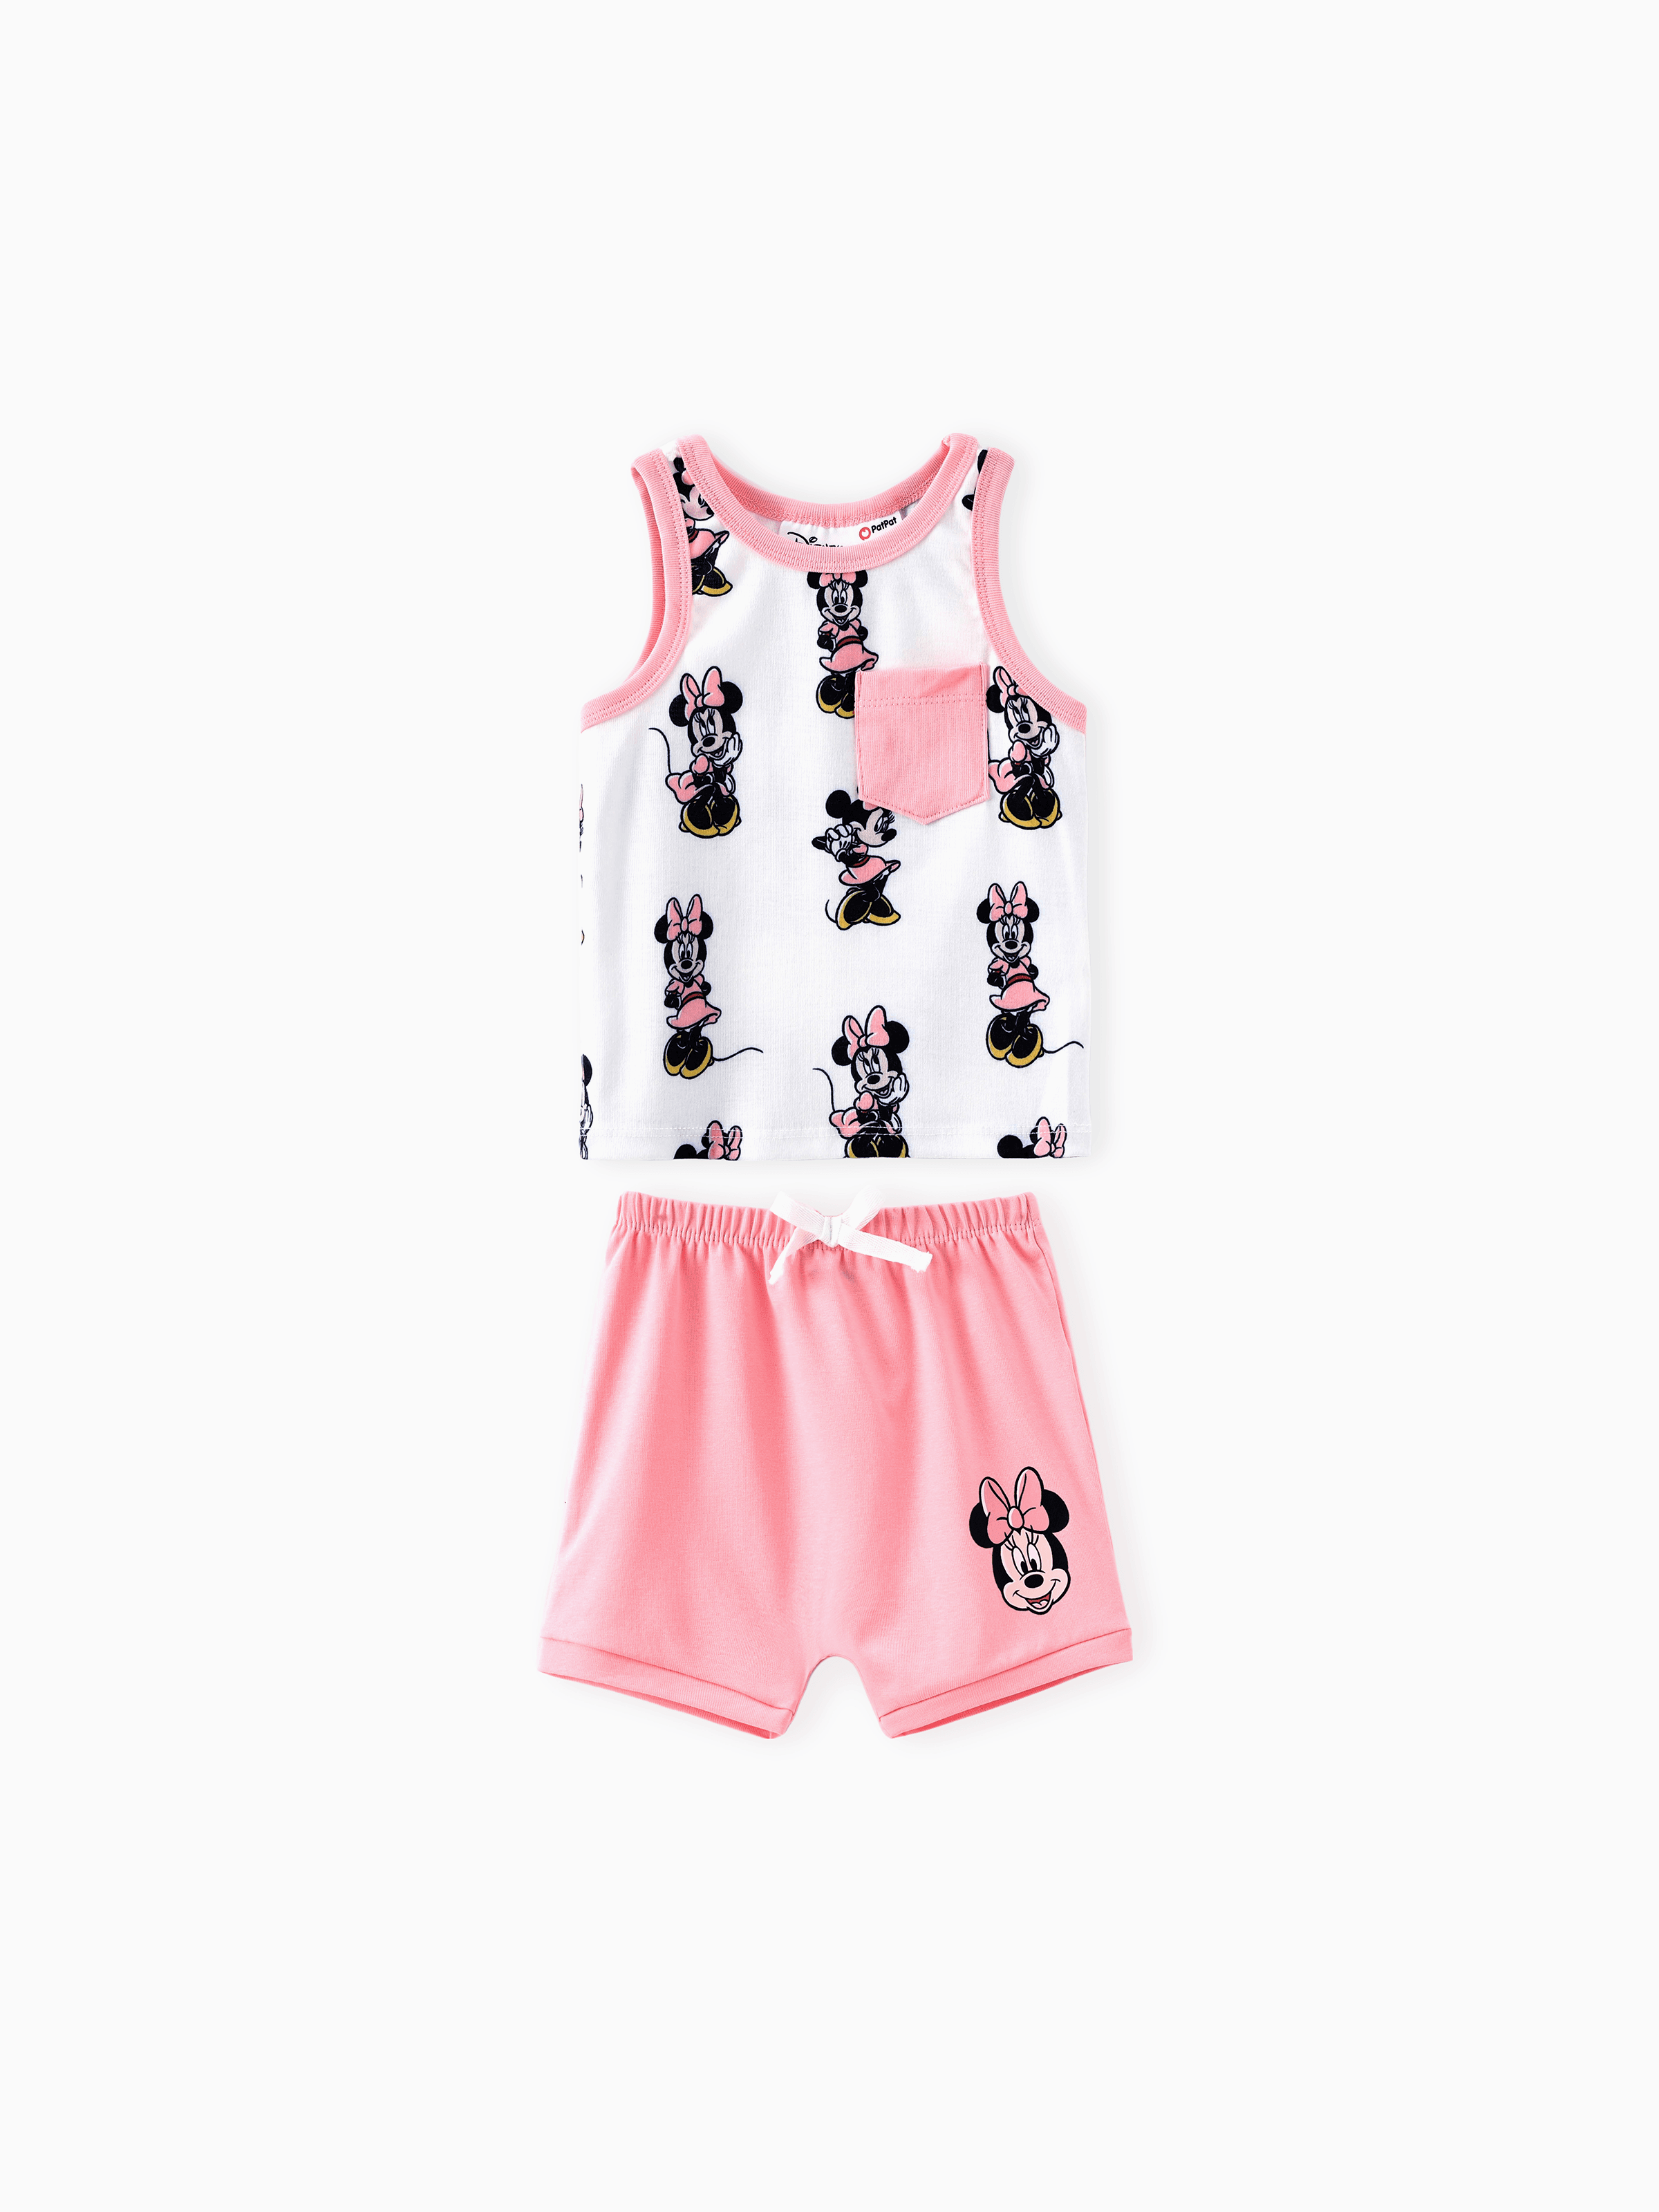 

Disney Mickey and Friends Baby/Toddler Boys/Girls Character Print Pocket Tank Top with Cotton Shorts Sporty Set